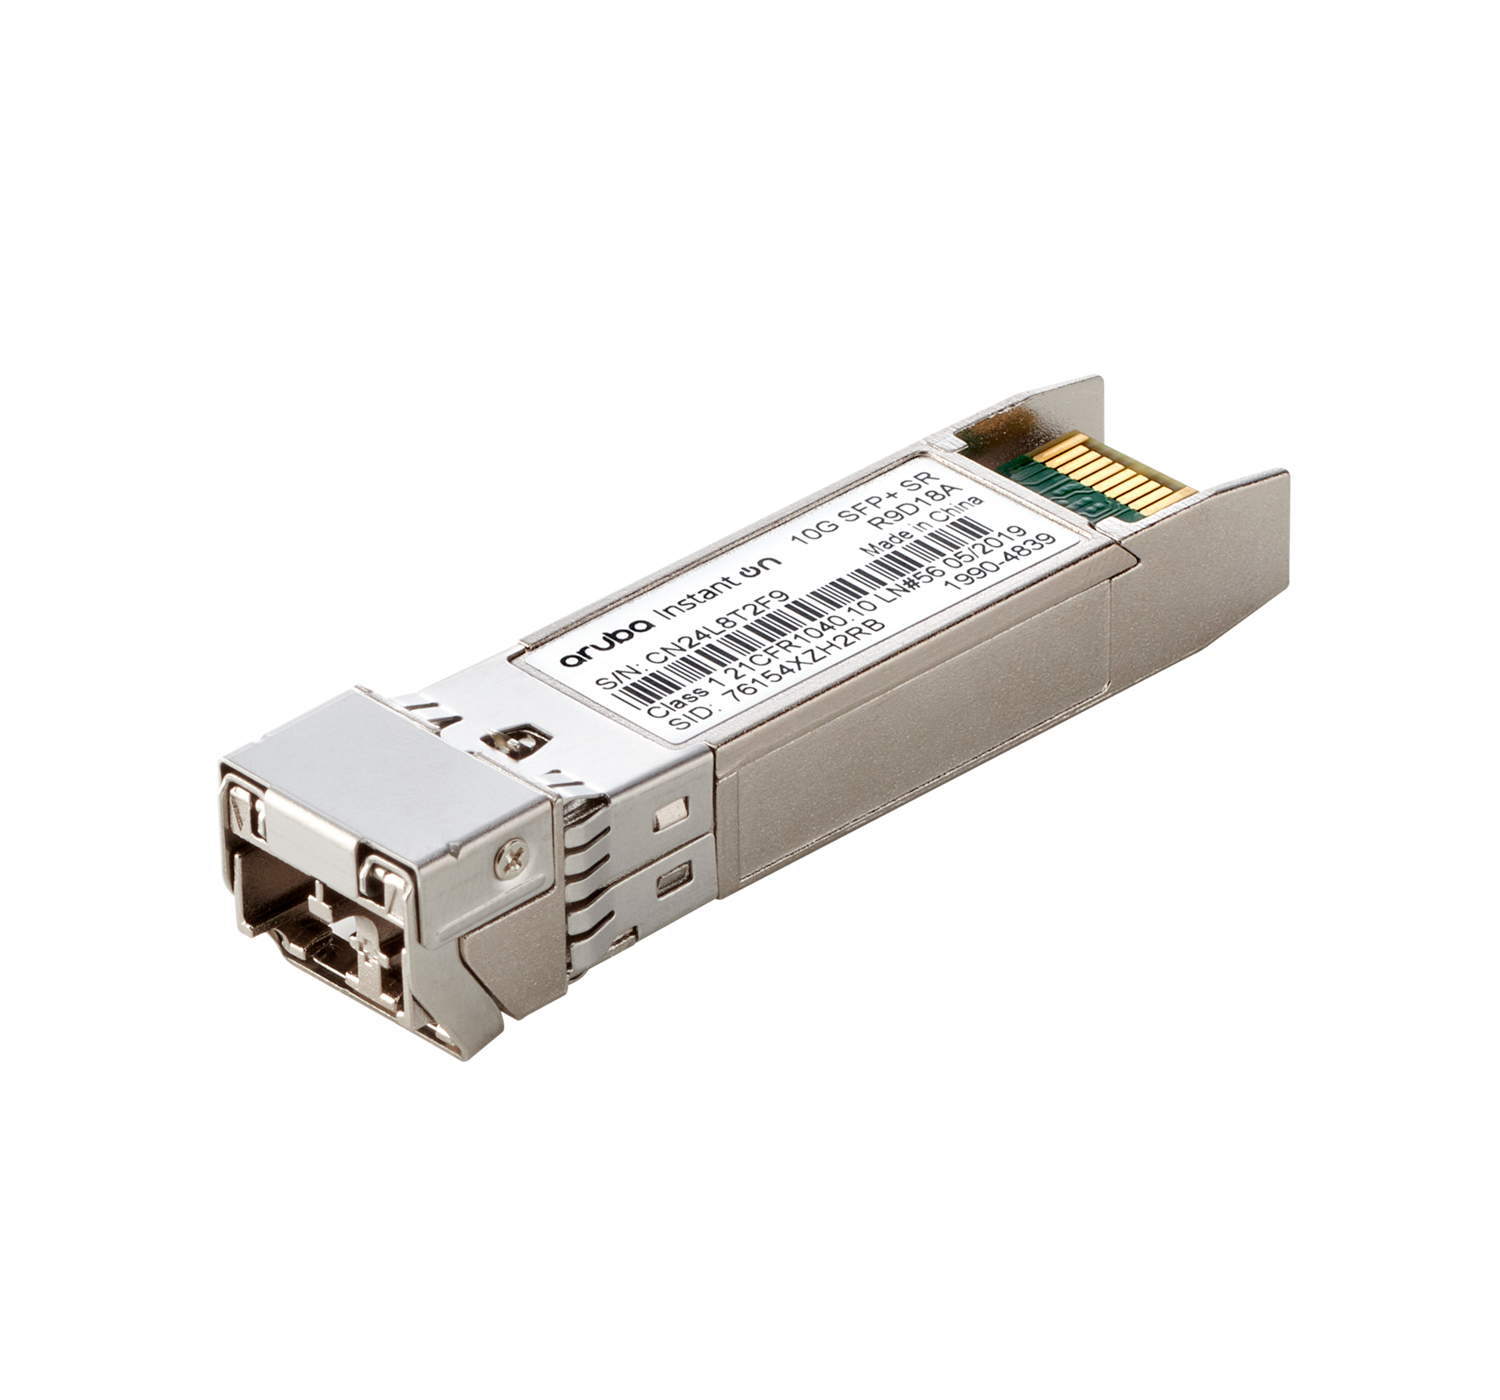 HPE Networking Instant On SFP+ TRANSCEIVER MODULE OPTIONAL ZU HPE ARUBA INSTANT ON SFP+